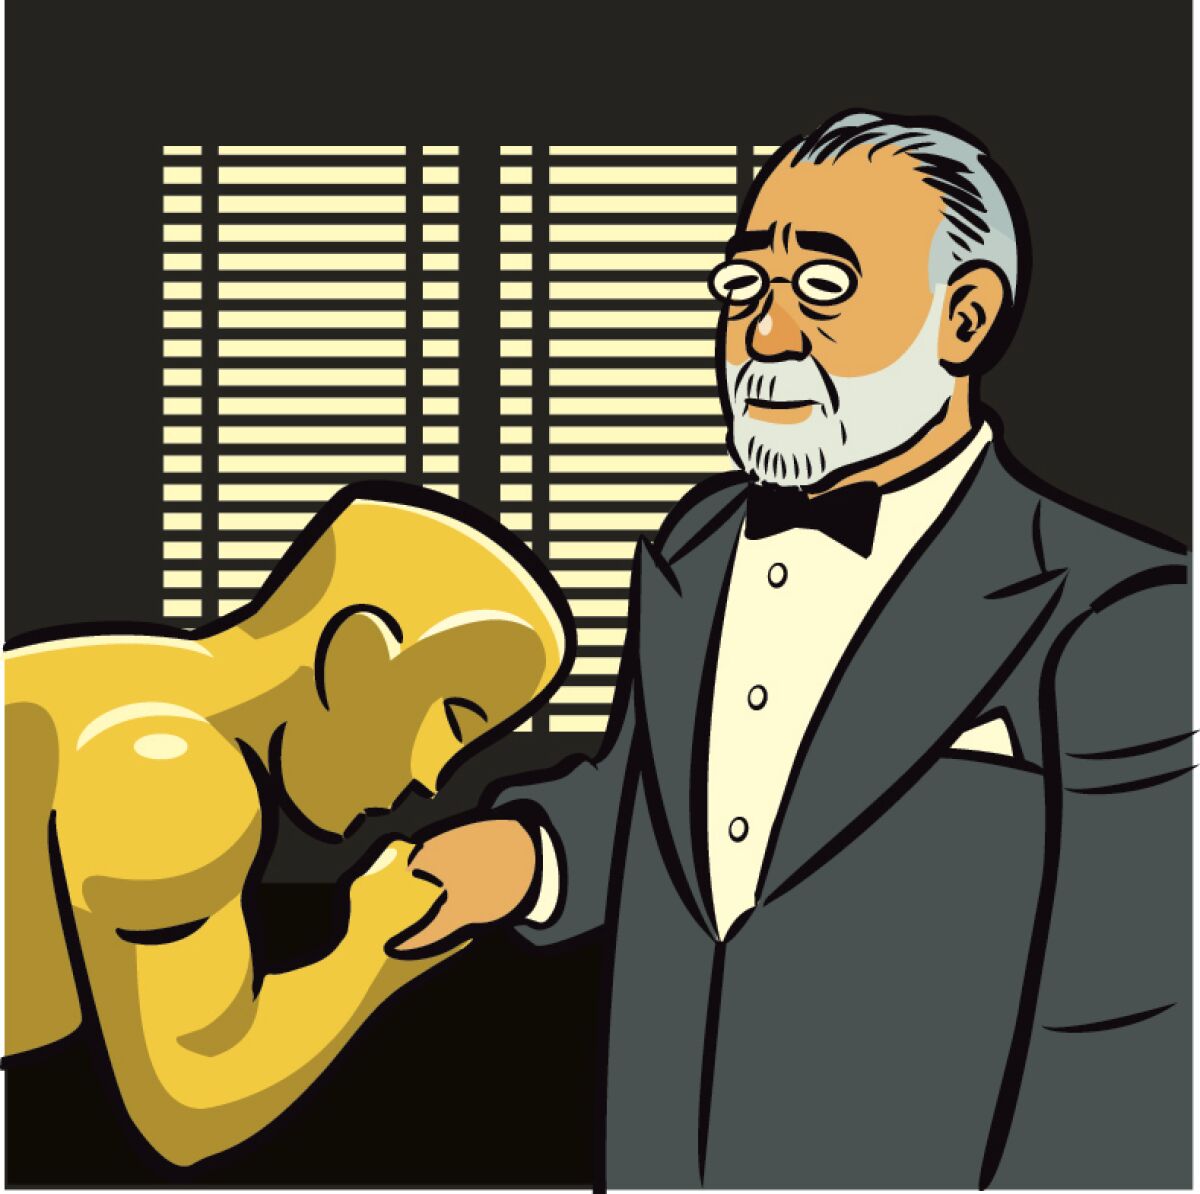 In a tough field, Oscar goes home with "Godfather" director Francis Ford Coppola.